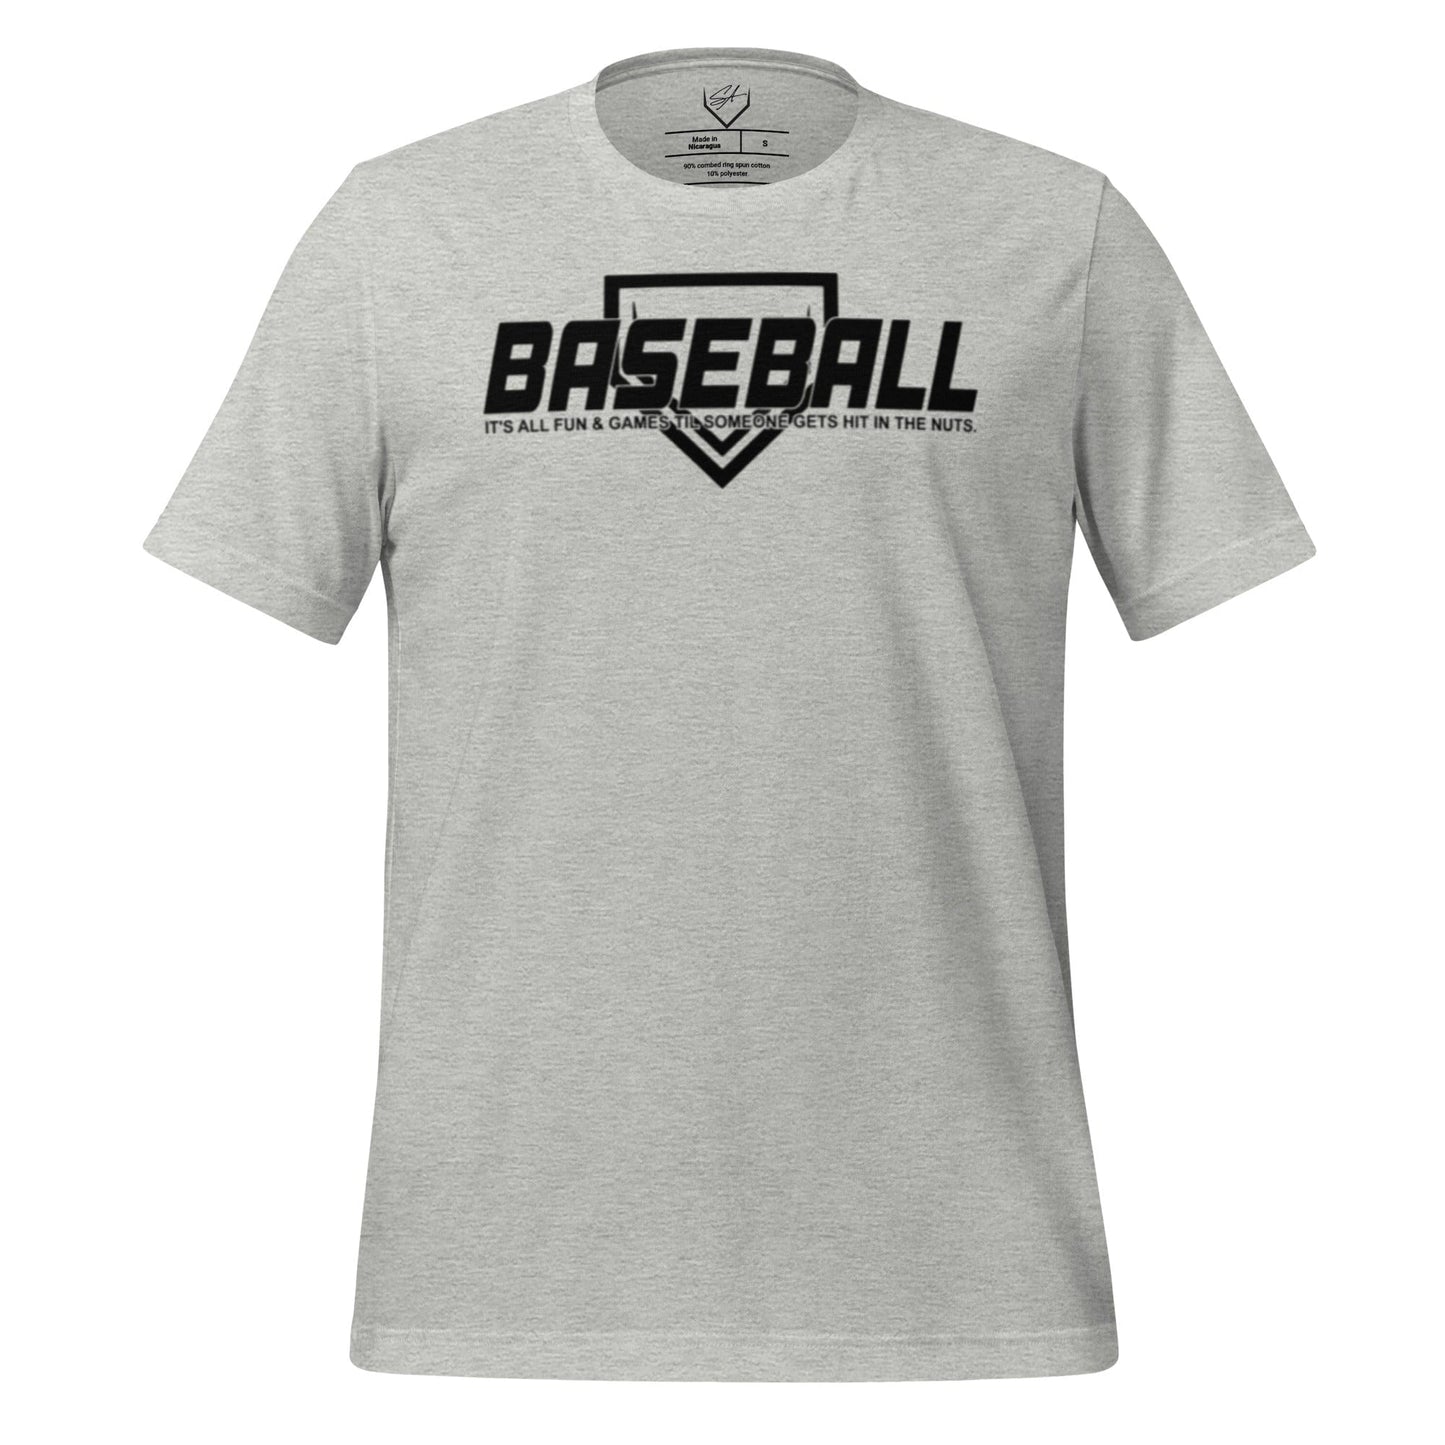 Baseball Its All Fun and Games - Adult Tee